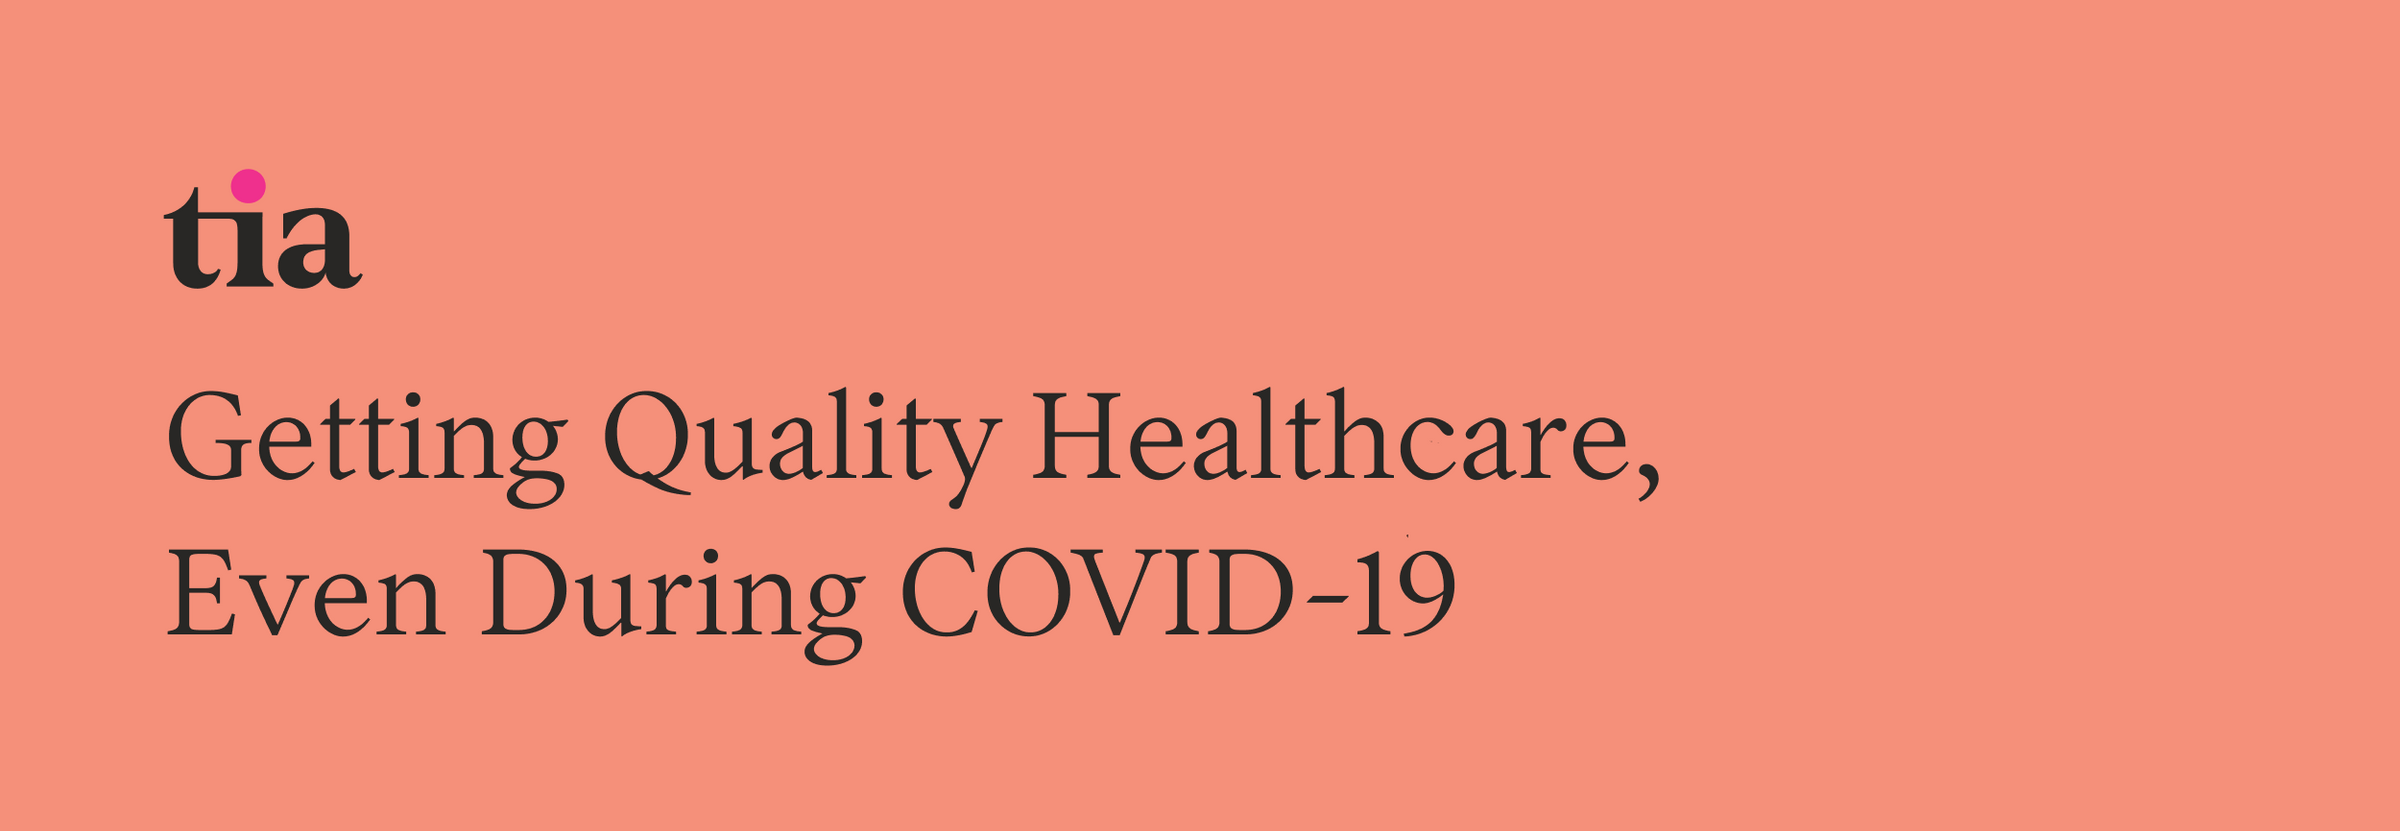 Getting Quality Healthcare, Even During COVID-19 | Tia